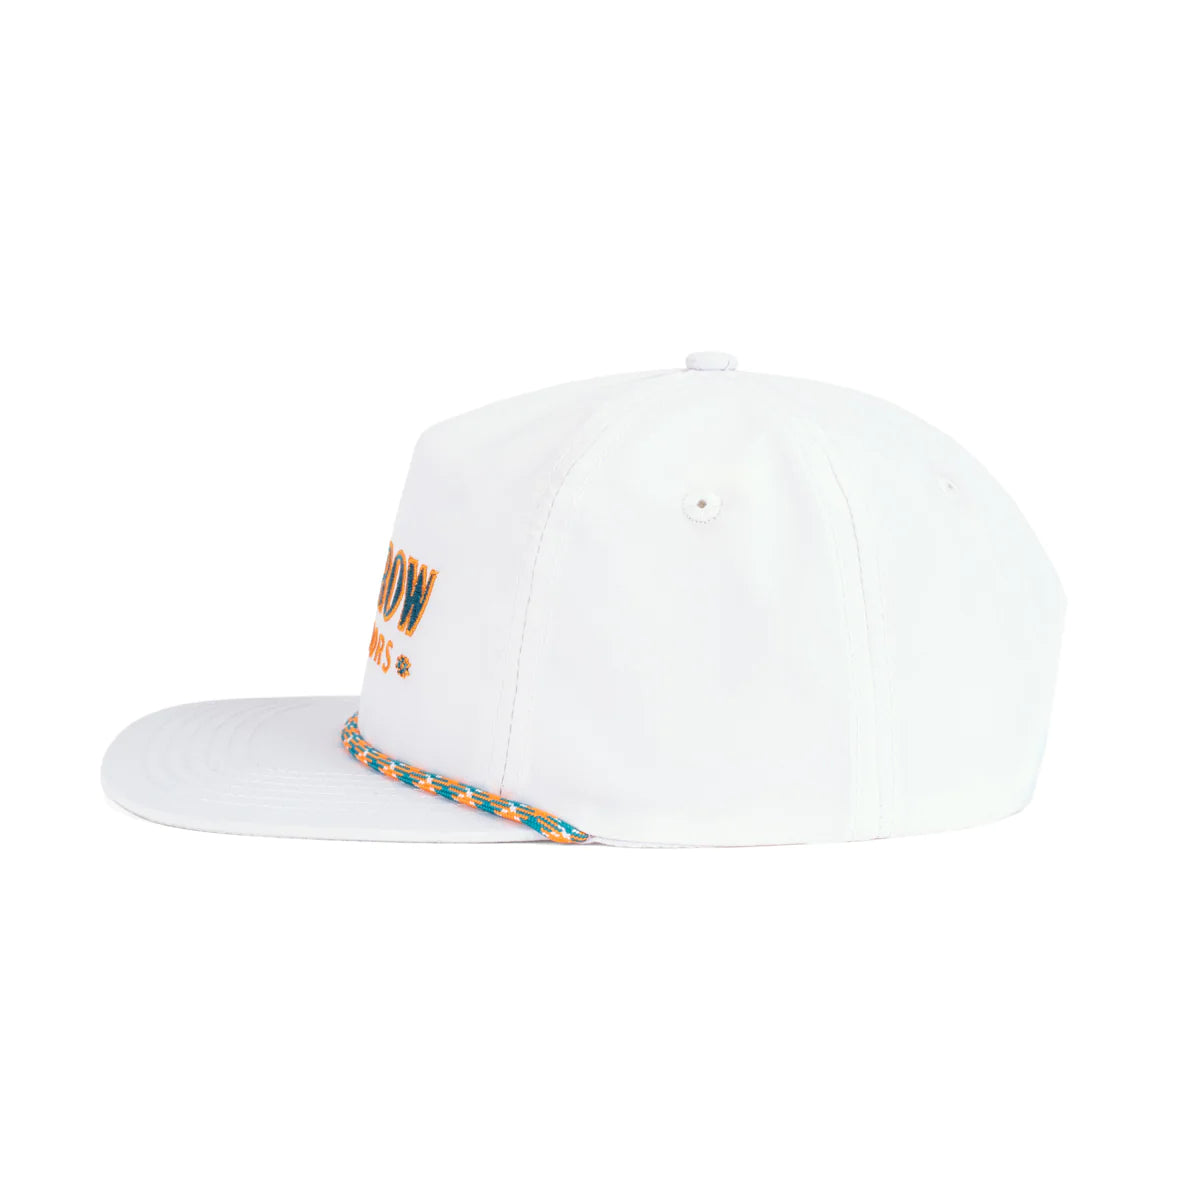 OLD ROW OUTDOORS NYLON ROPE HAT - WHITE